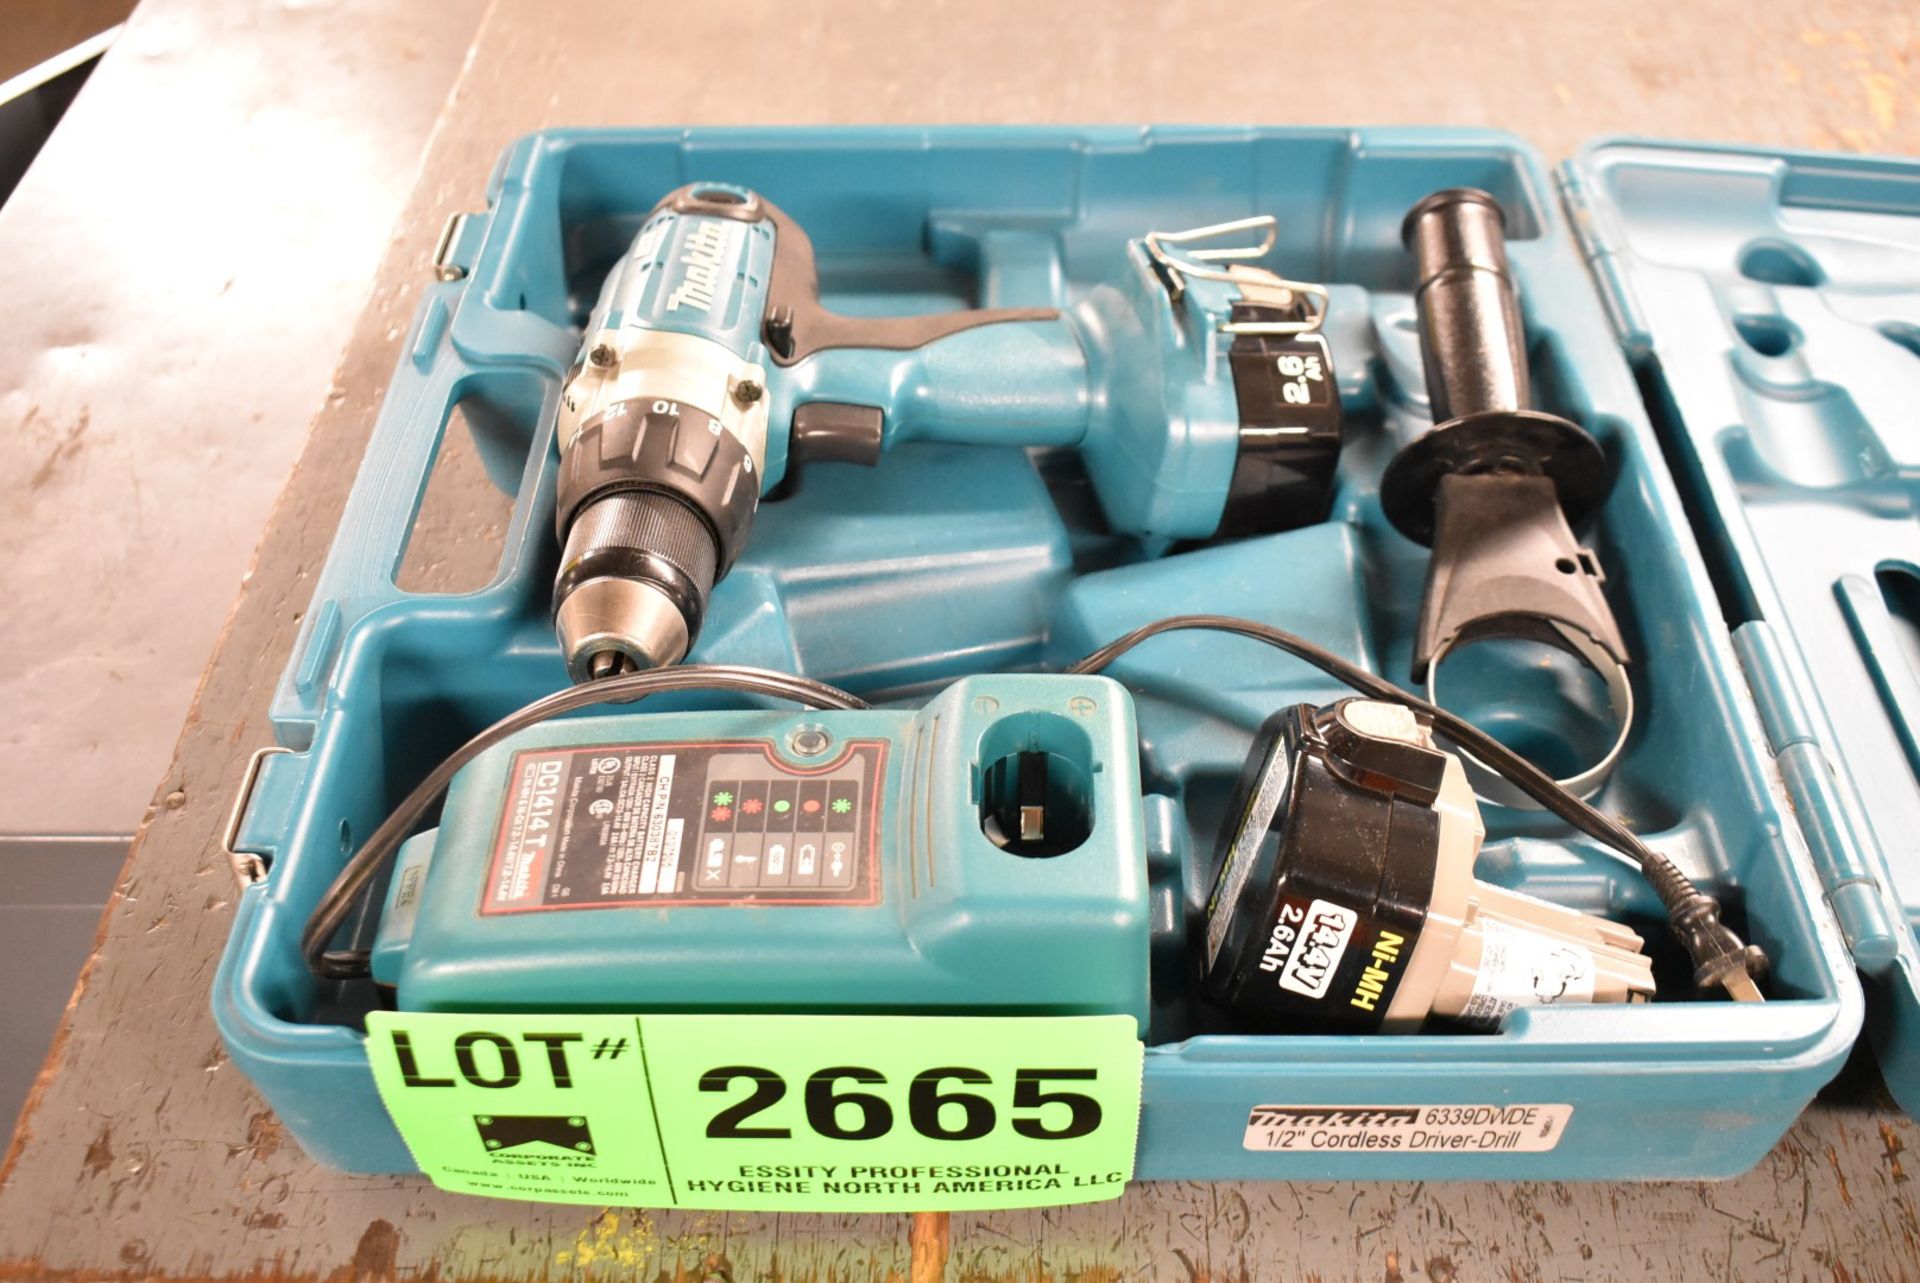 MAKITA 14.4V CORDLESS DRILL SET [RIGGING FEES FOR LOT #2665 - $25 USD PLUS APPLICABLE TAXES]